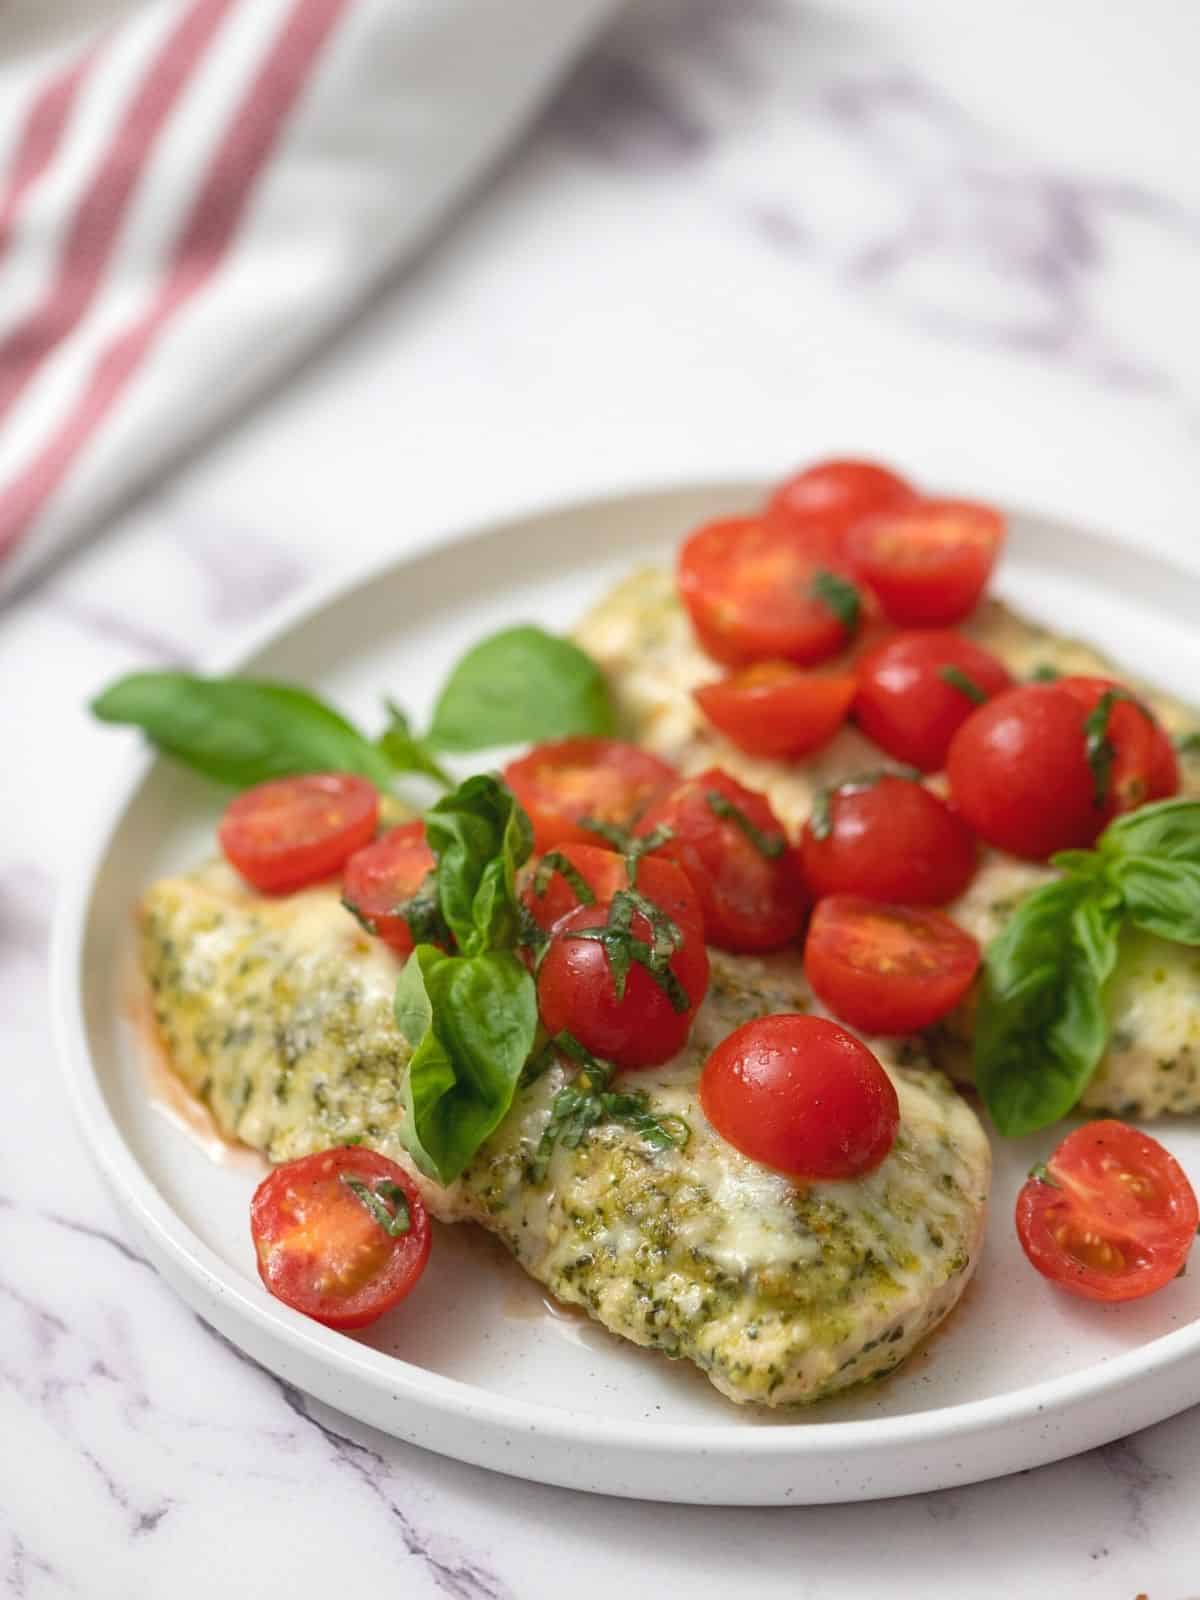 Plate with baked pesto chicken topped with fresh tomatoes and basil.